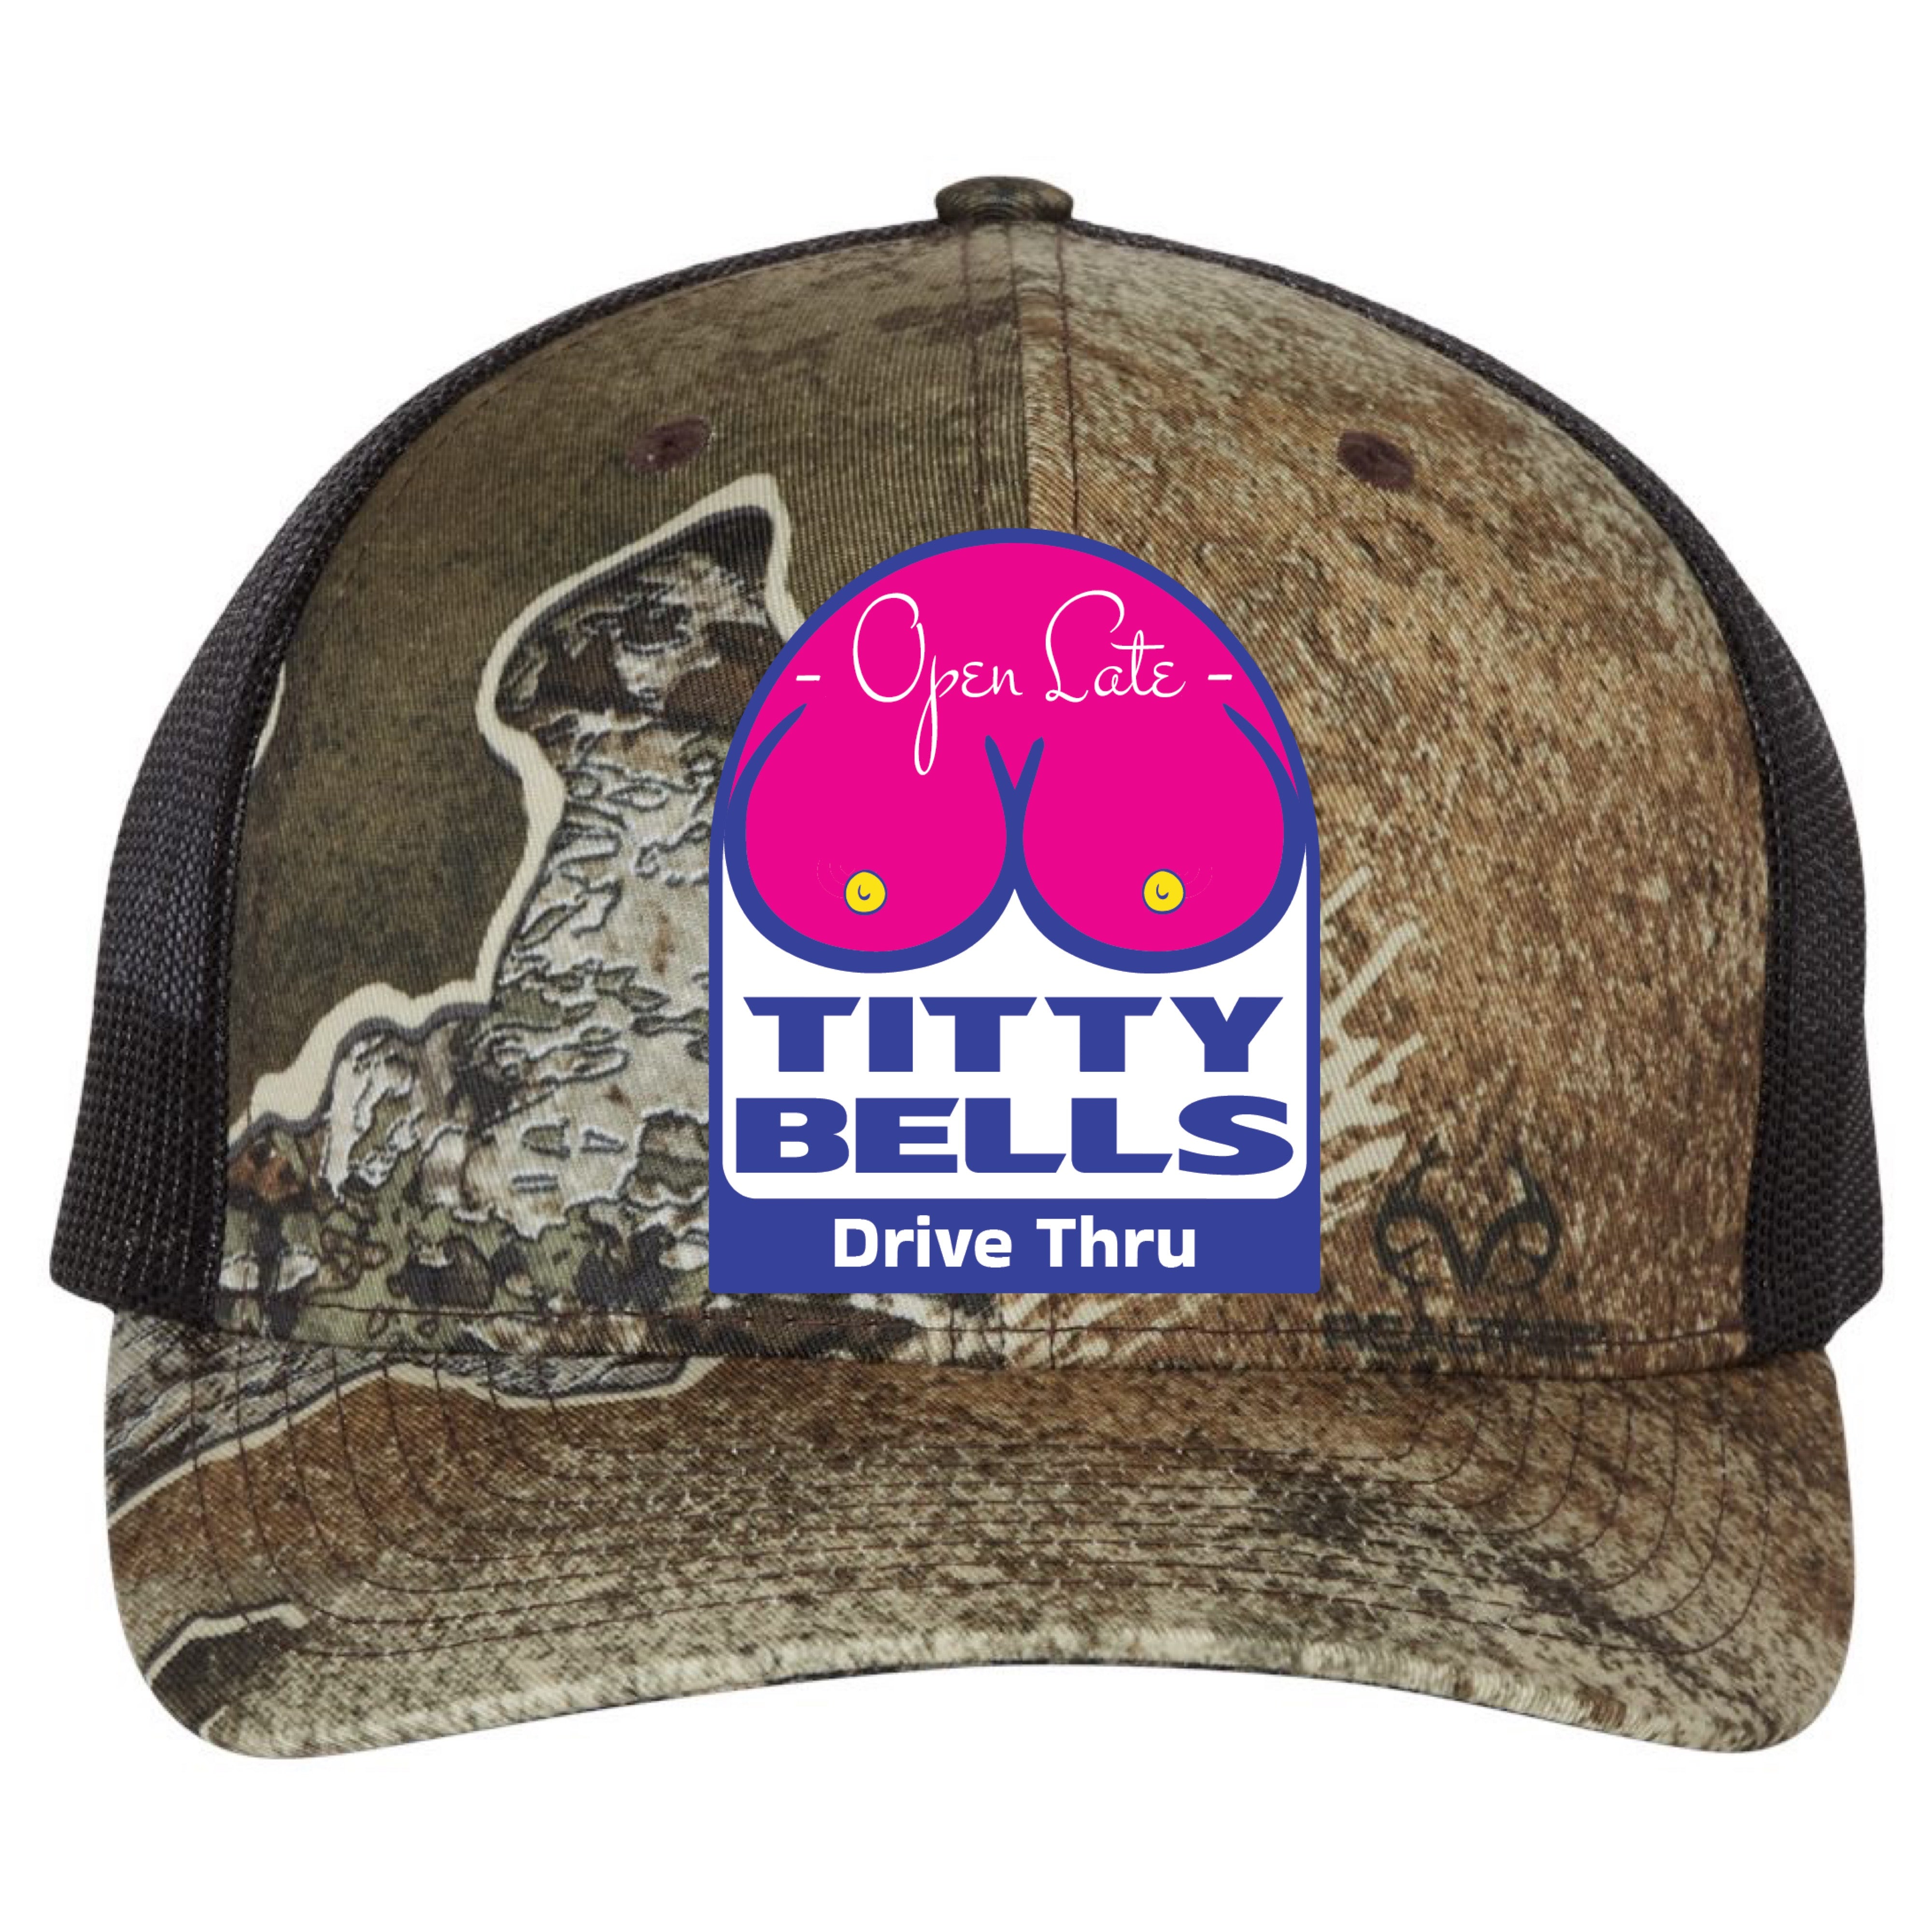 Titty Bells 3D Patterned Snapback Trucker Hat- Realtree Excape/ Black